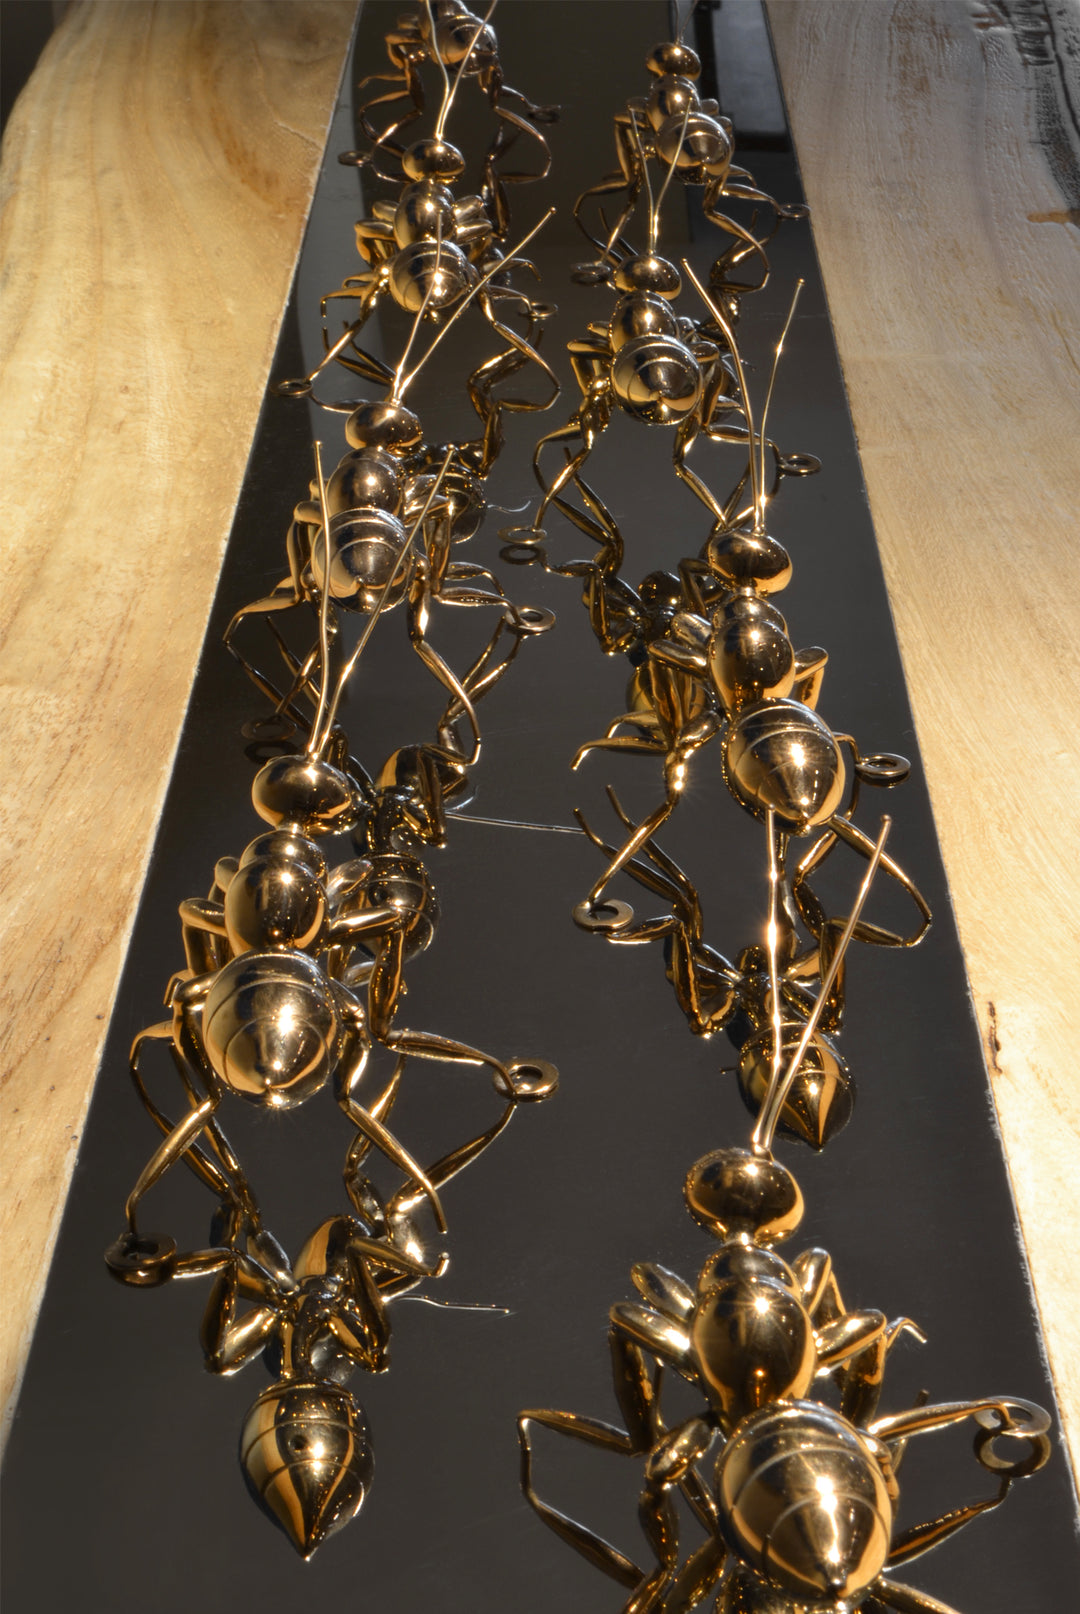 Copper Ant - Lifestyle shot 4 - Best seller. Decorative Object / Sculpture. Copper Colour. Ant Decorative object. Can be used as a free standing ornament or wall decor. The Ant feet contains fixtures that allowed the sculpture to be hung on the wall and u